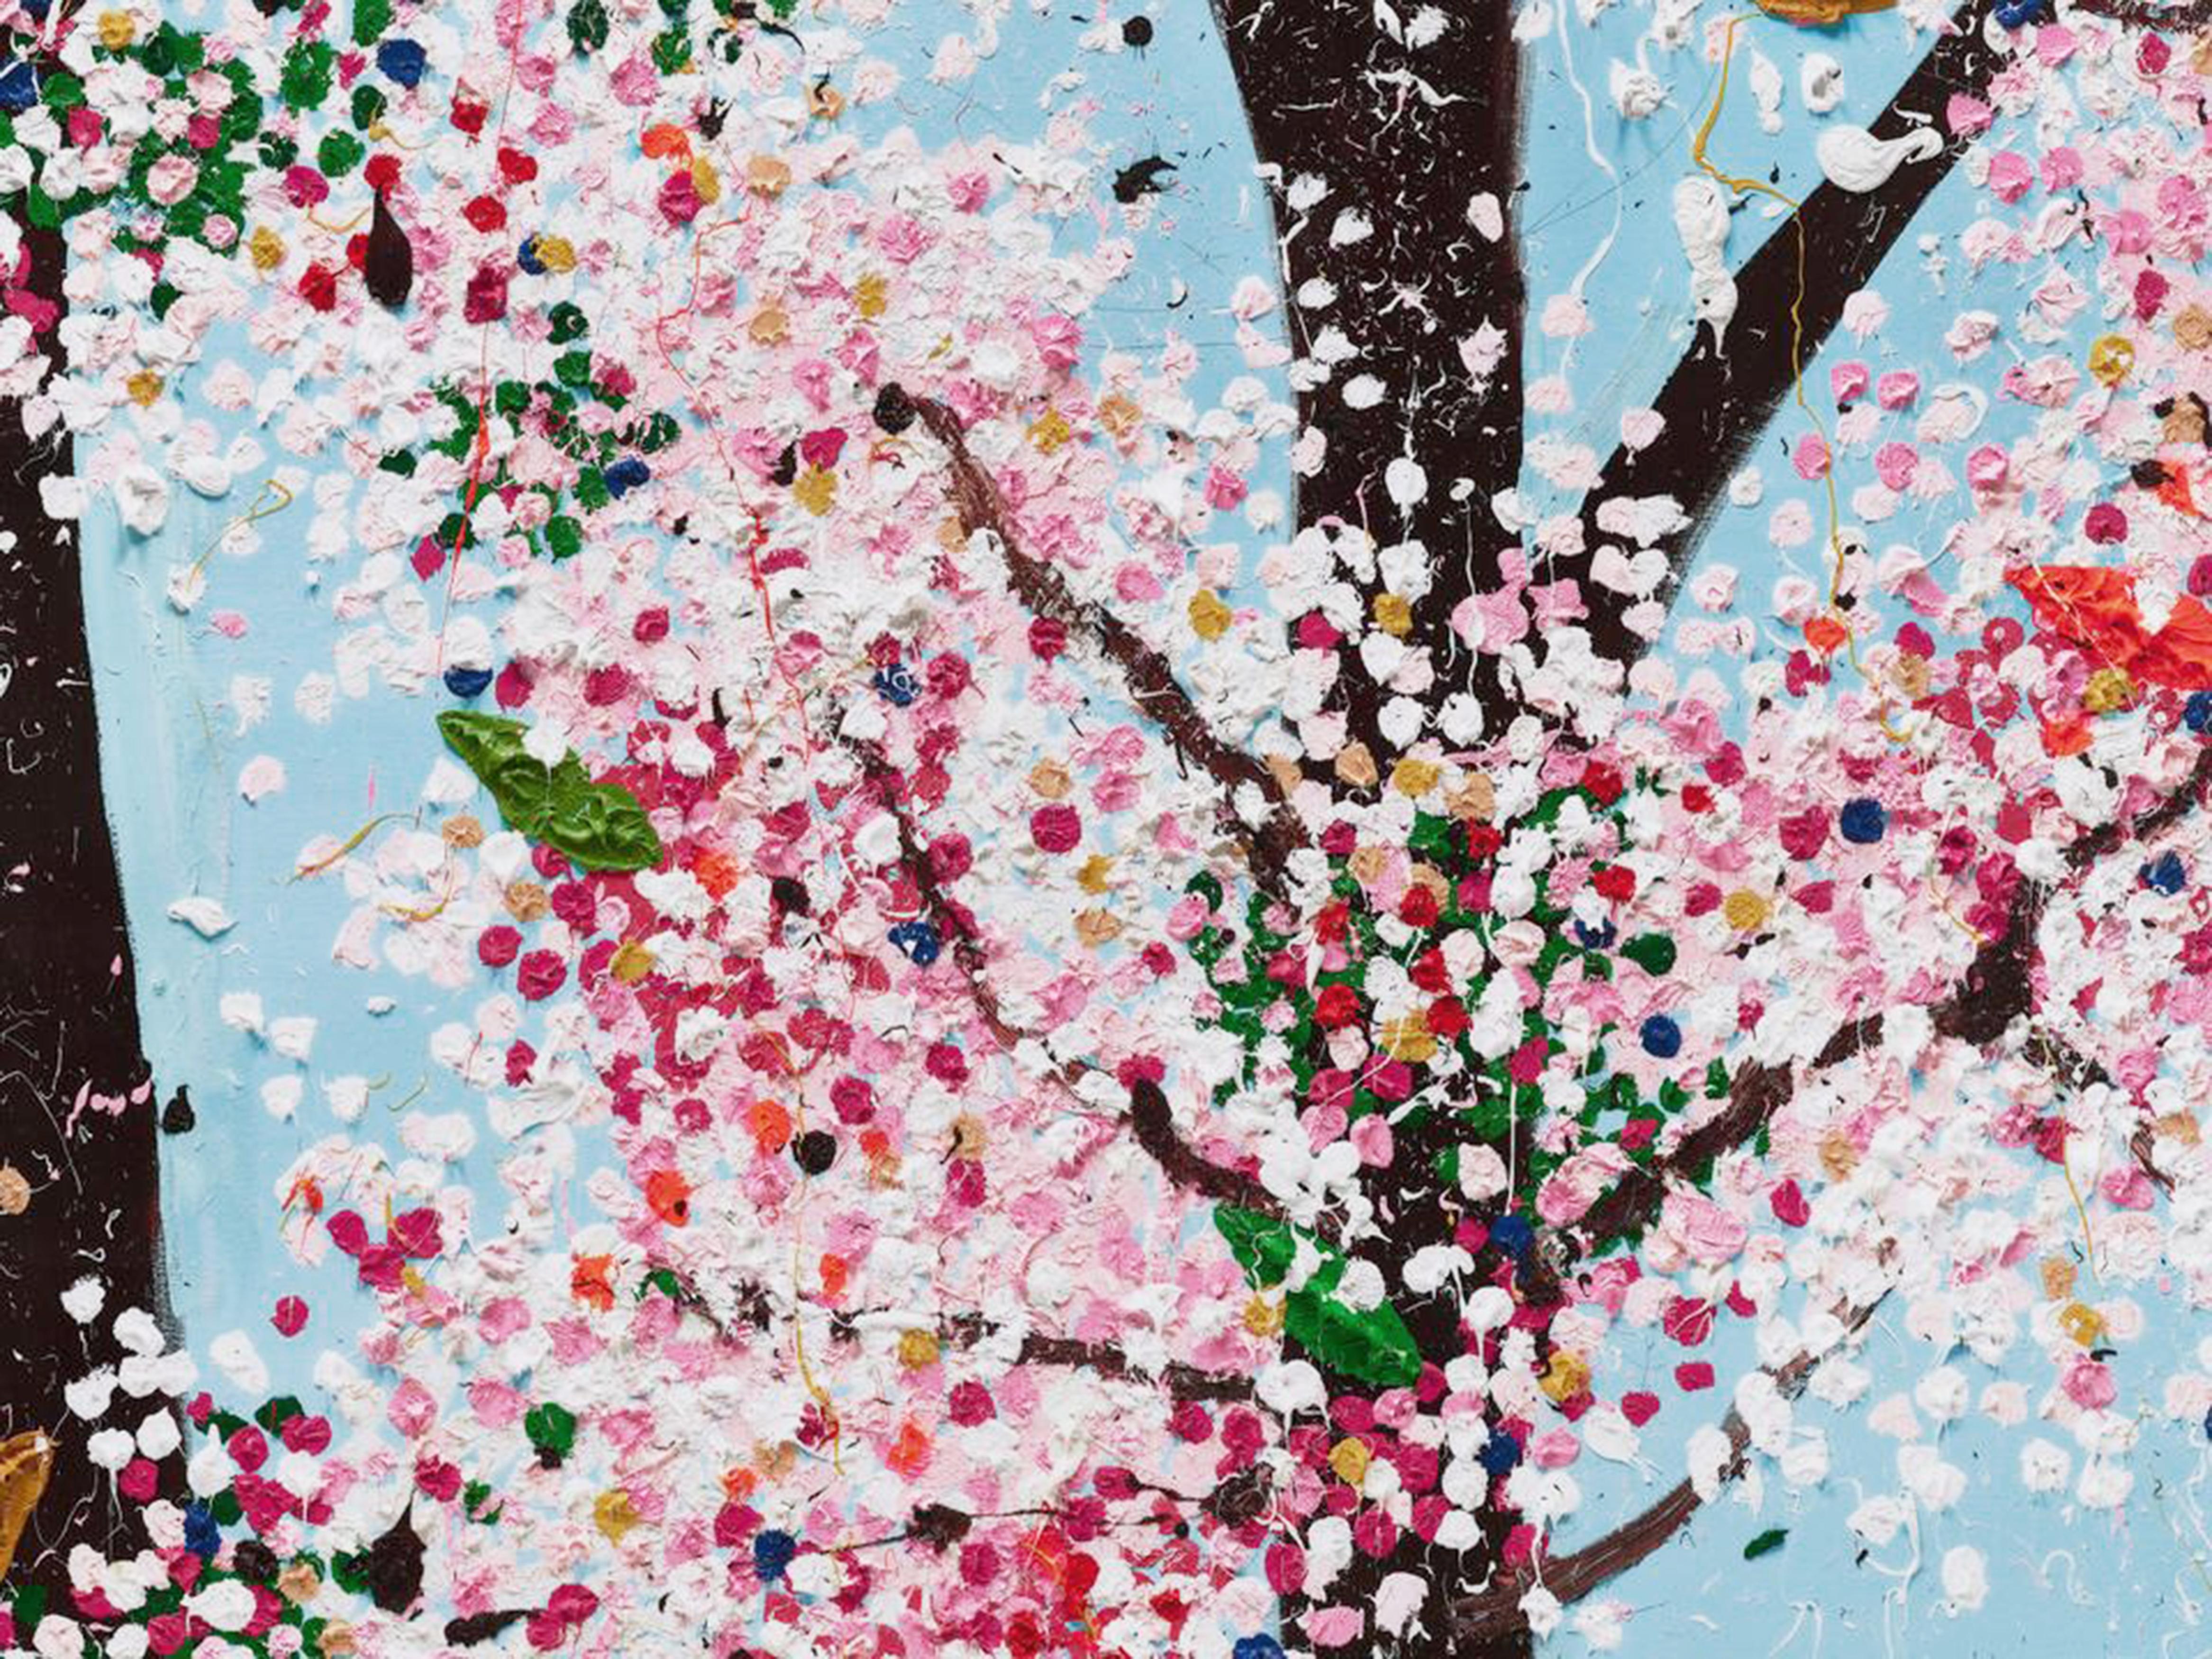 The contemporary pop art cherry blossom ‘Honesty' is one of the eight from the iconic ‘Virtues’ series by Damien Hirst, the laminated giclée print on aluminum panel was created in 2021 as a reflection of his latest exploration as a master